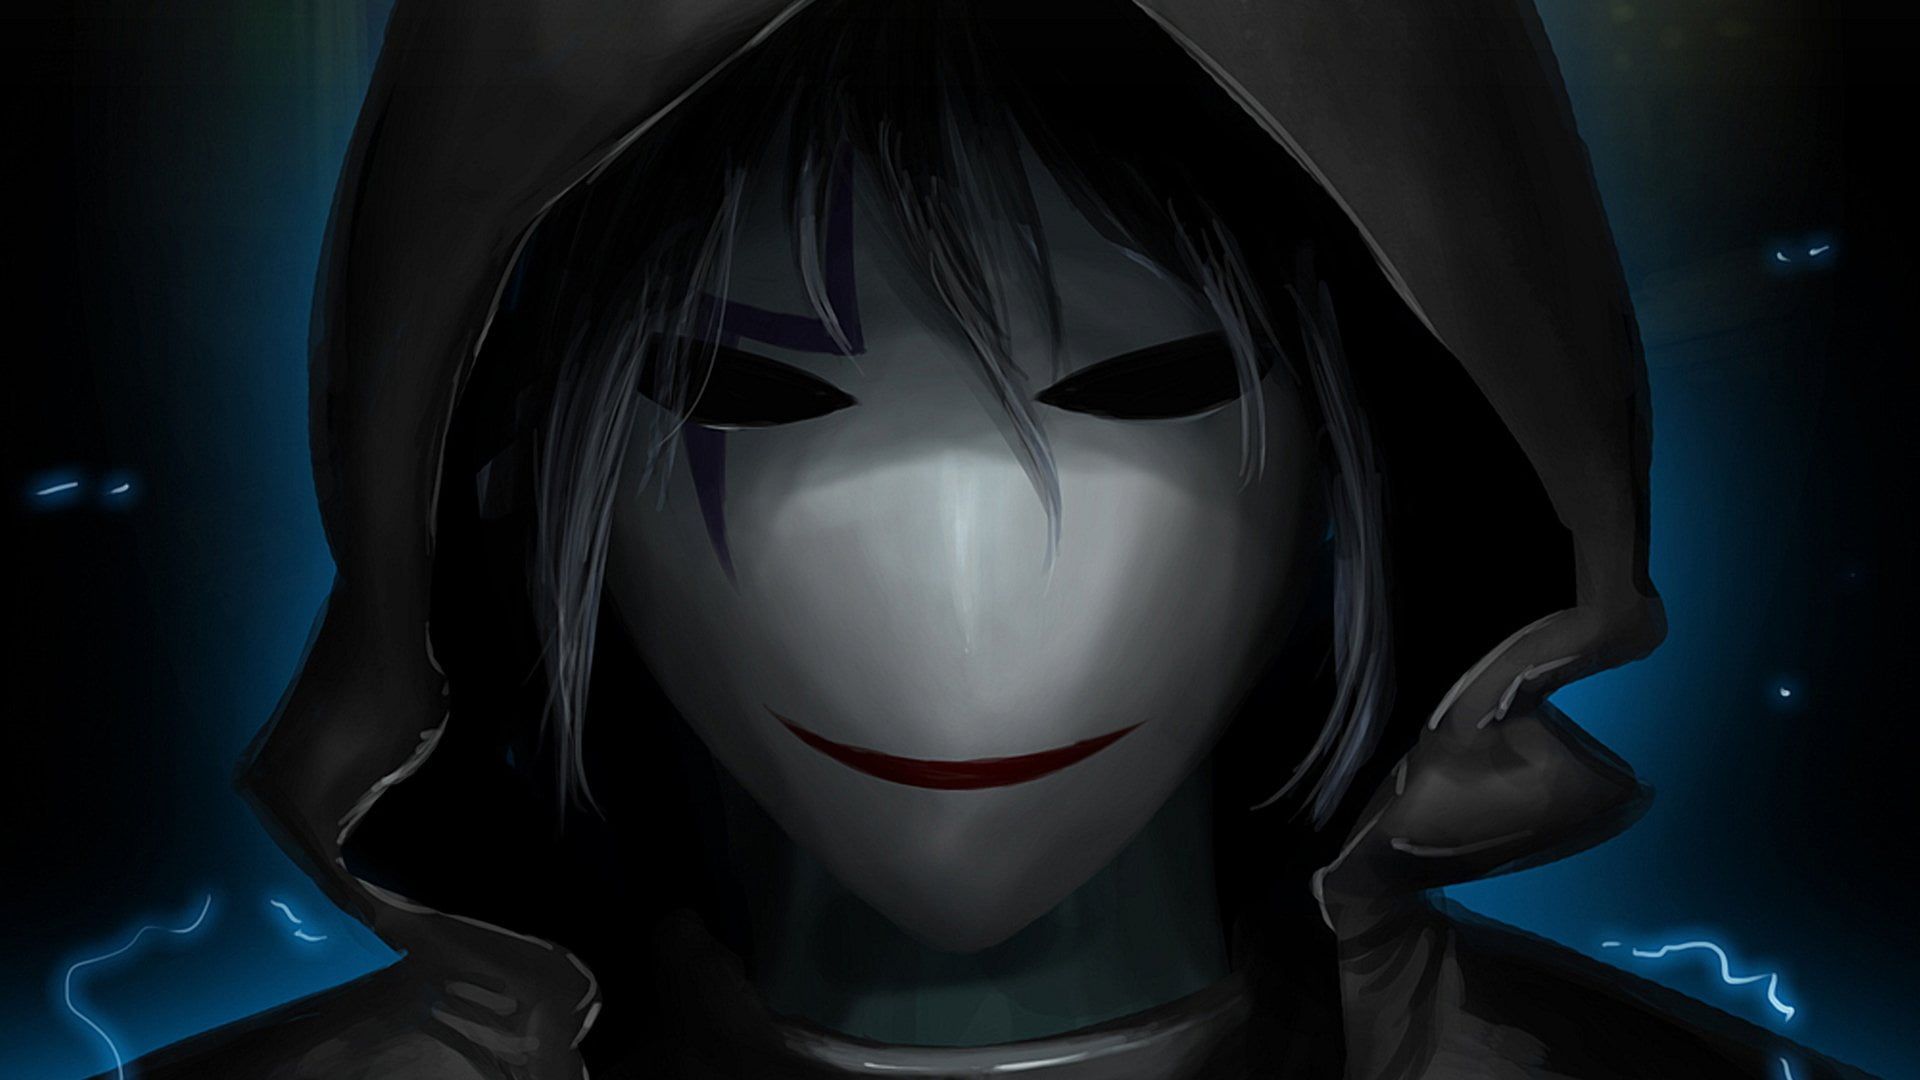 person wearing hood and mask wallpaper #Anime Darker Than Black